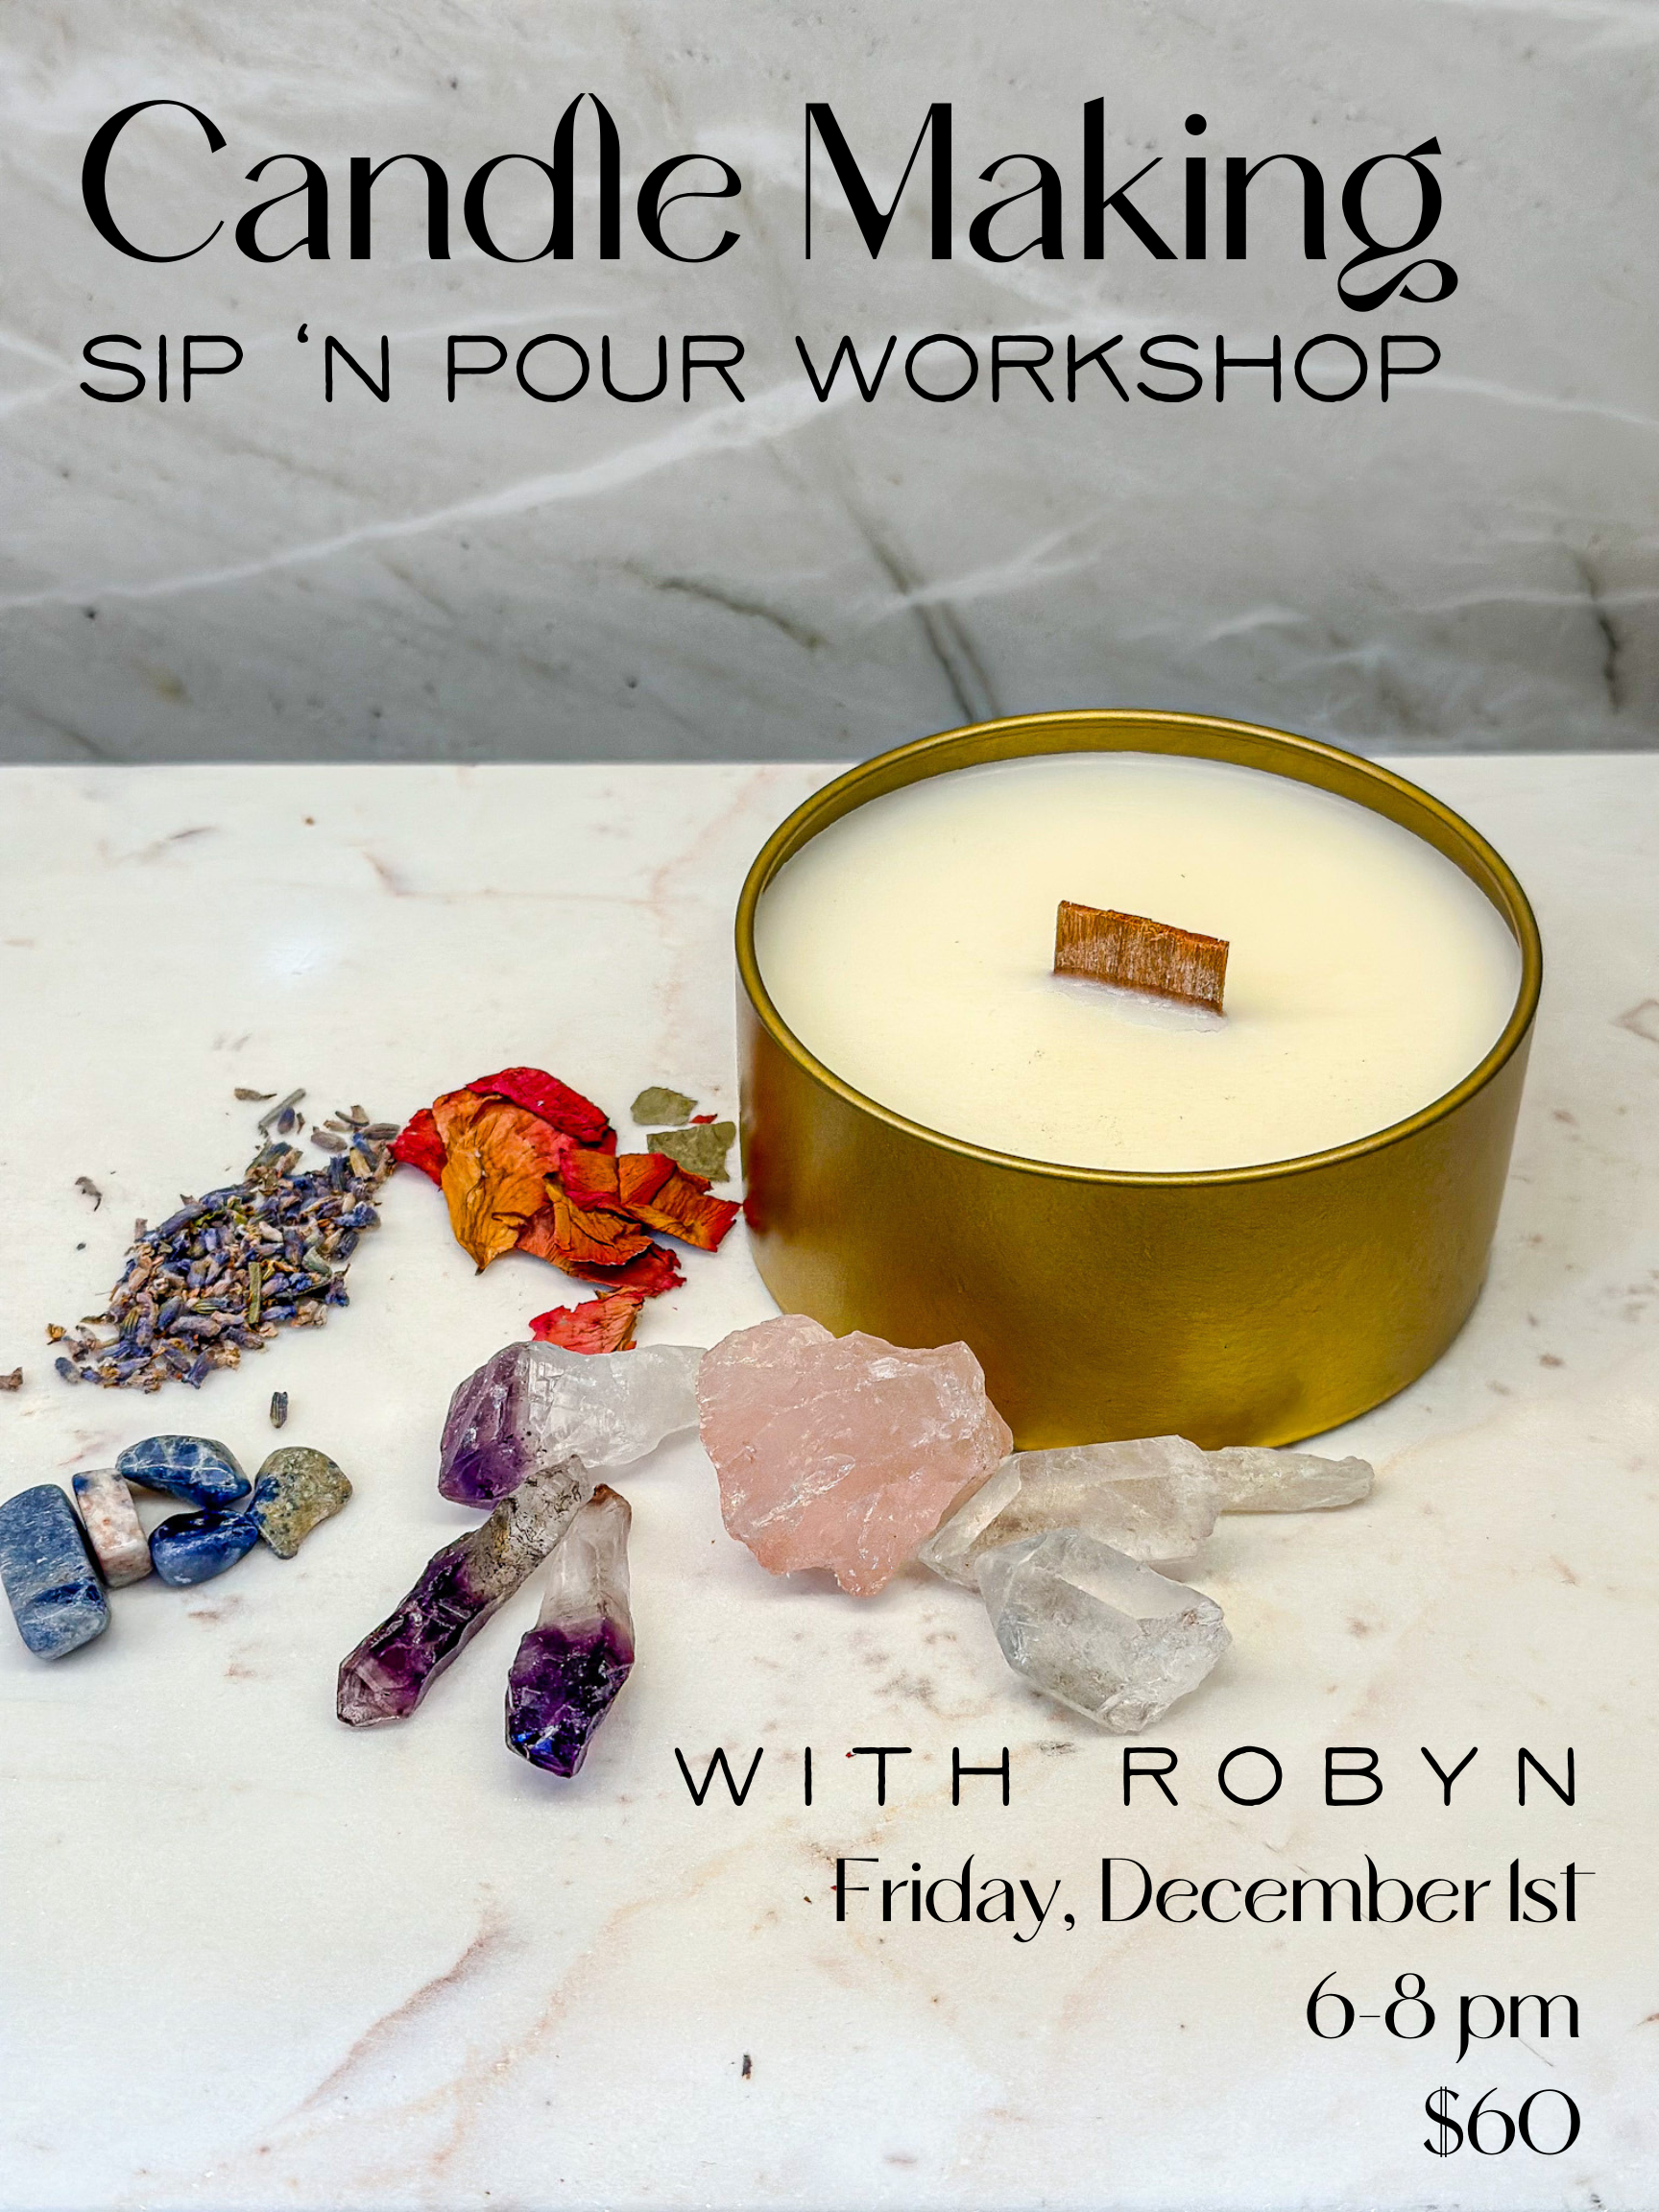 Candle Making Sip & Pour Workshop